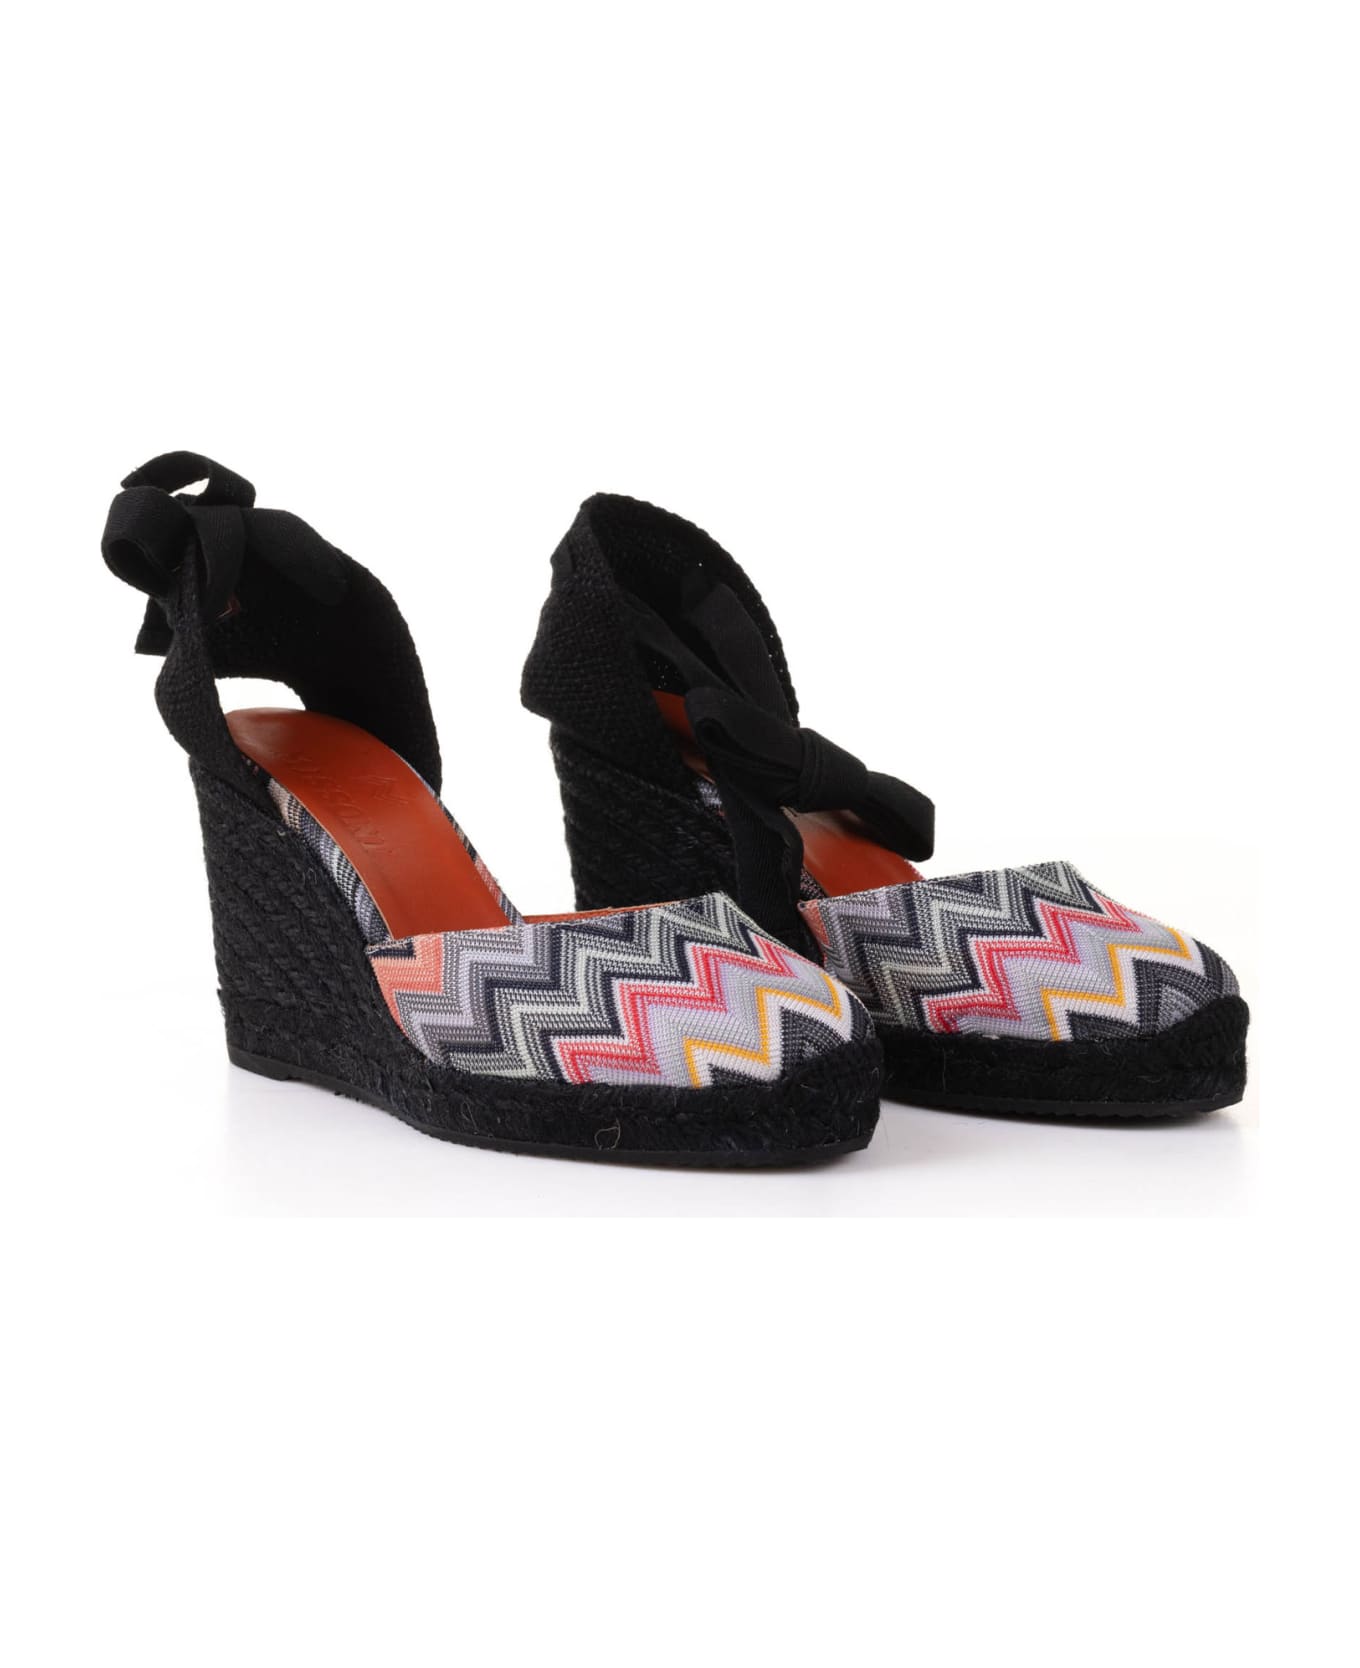 Missoni Espadrilles In Chevron Fabric With Wedge And Ankle Laces - BLACK